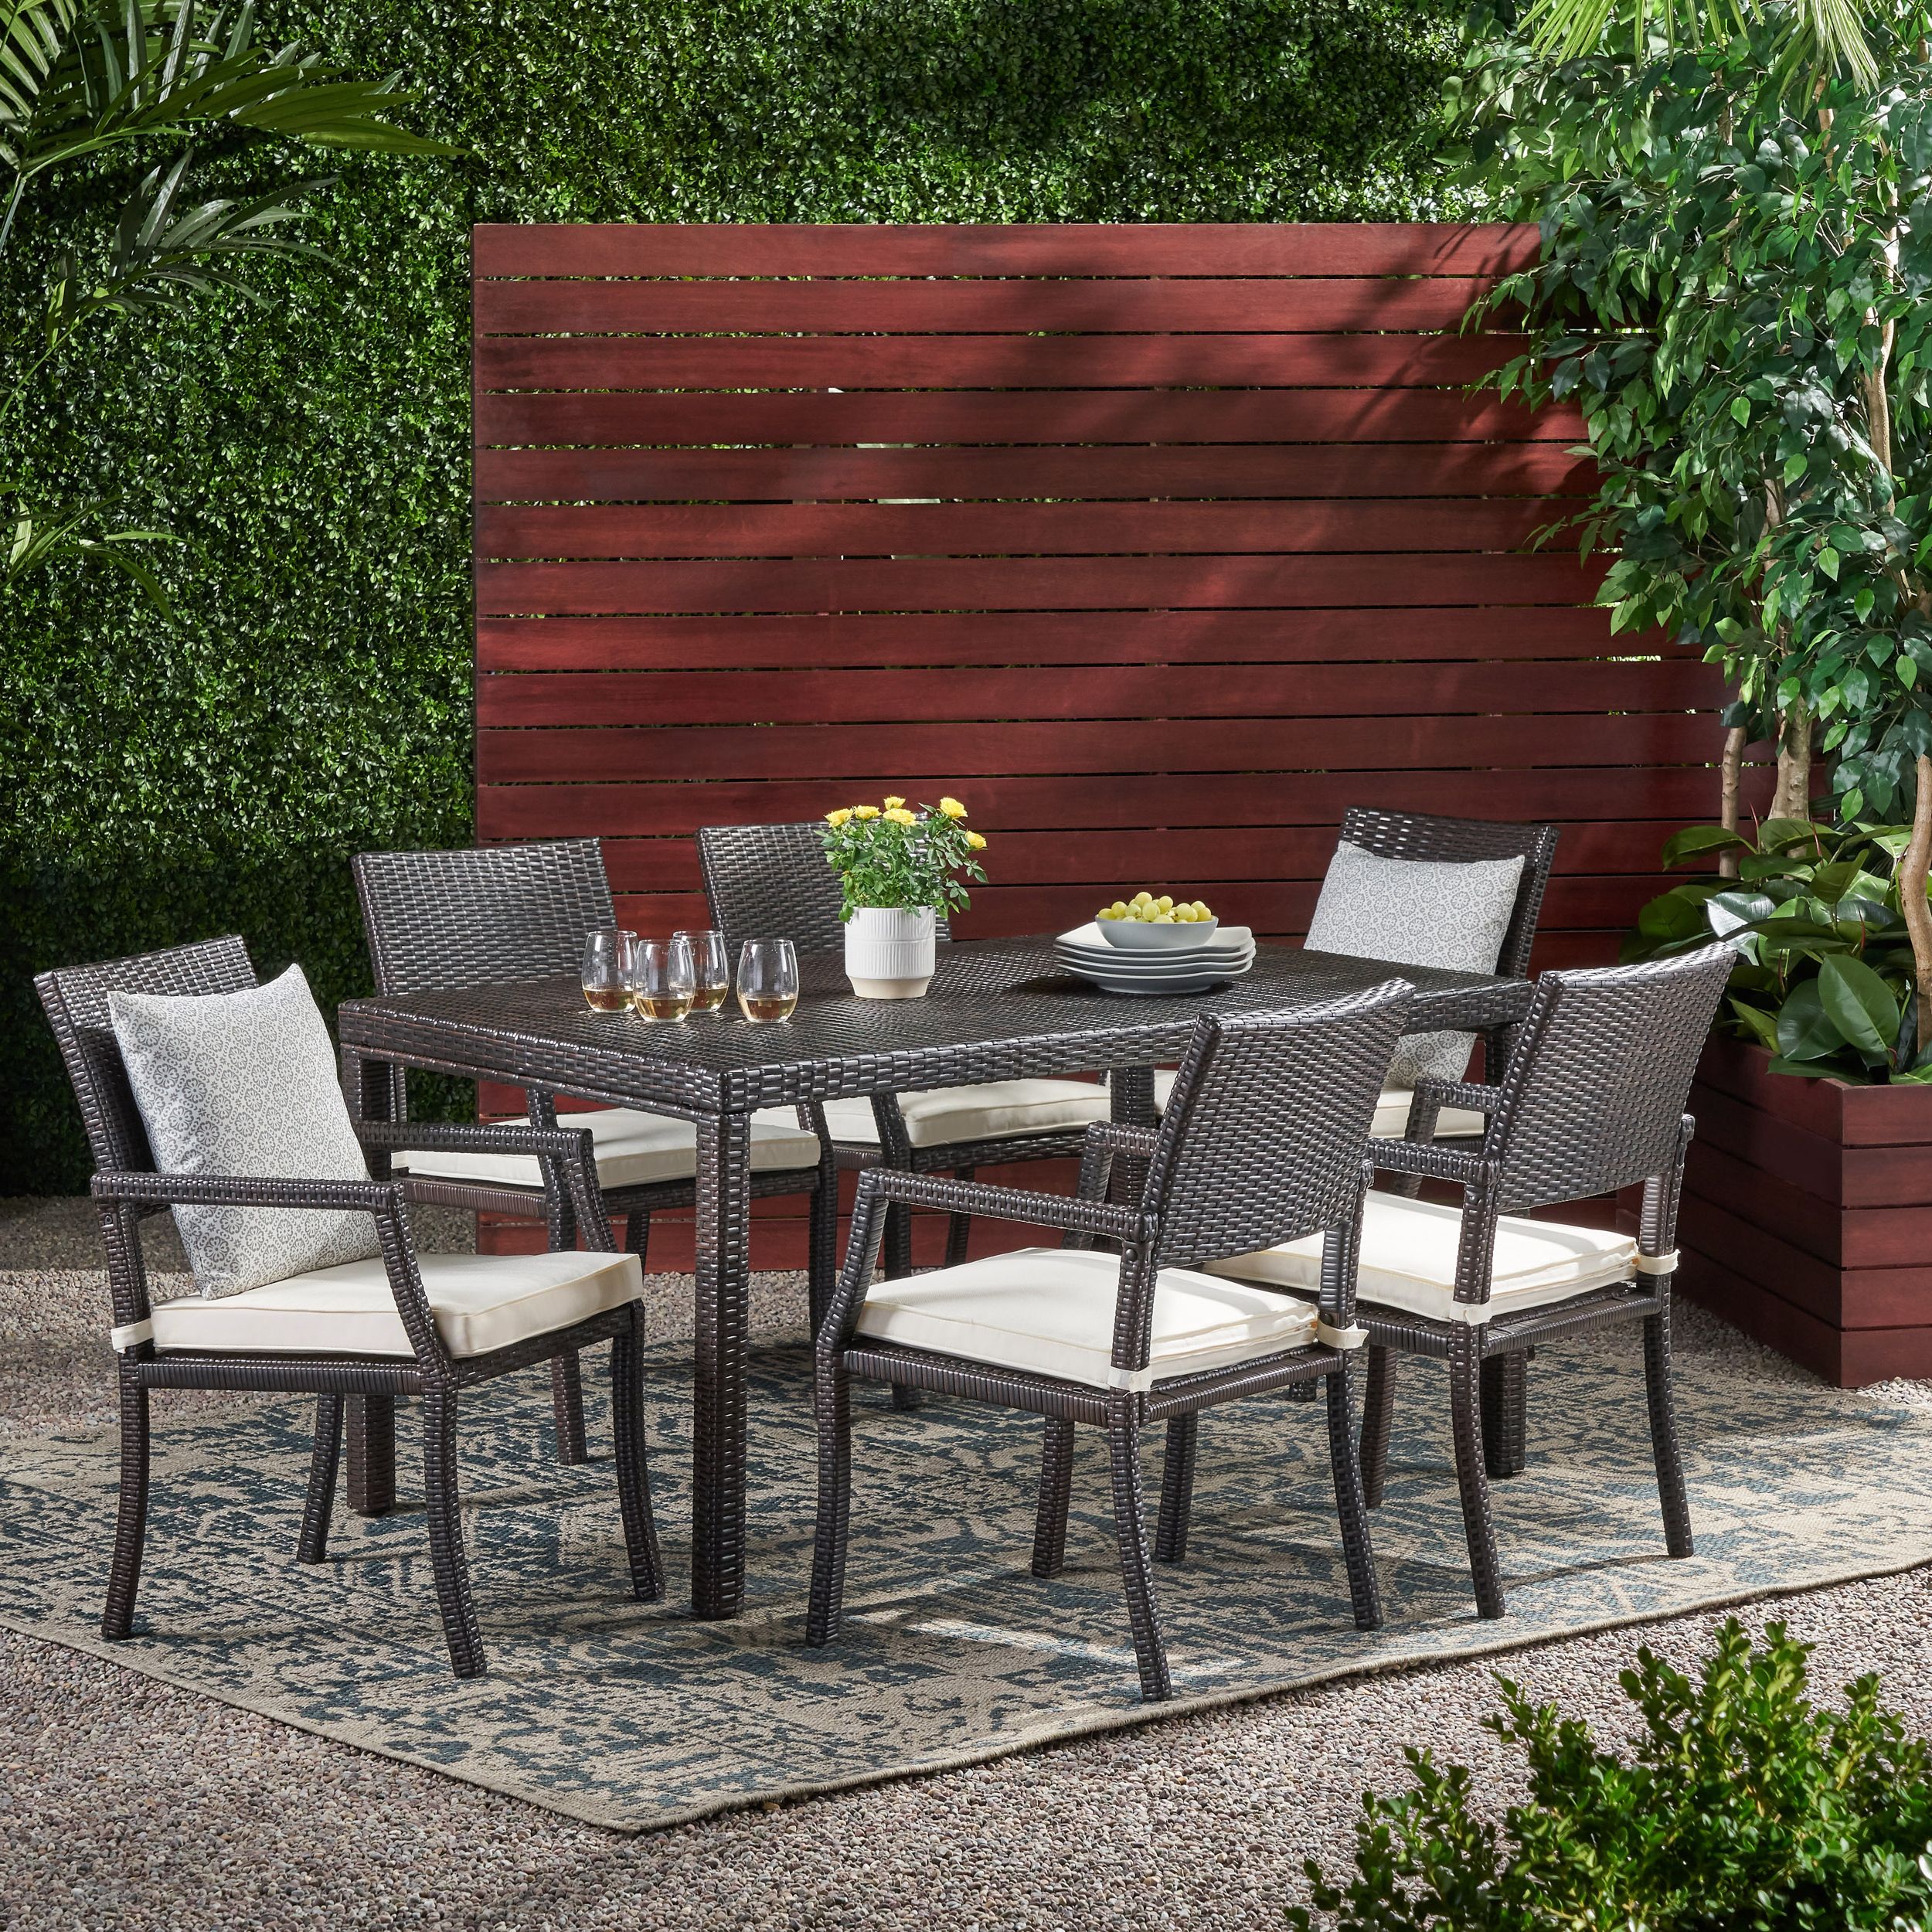 7 Piece Rectangular Patio Dining Sets With Trendy Outdoor 7 Piece Wicker Rectangular Dining Set,multibrown,white (View 1 of 15)